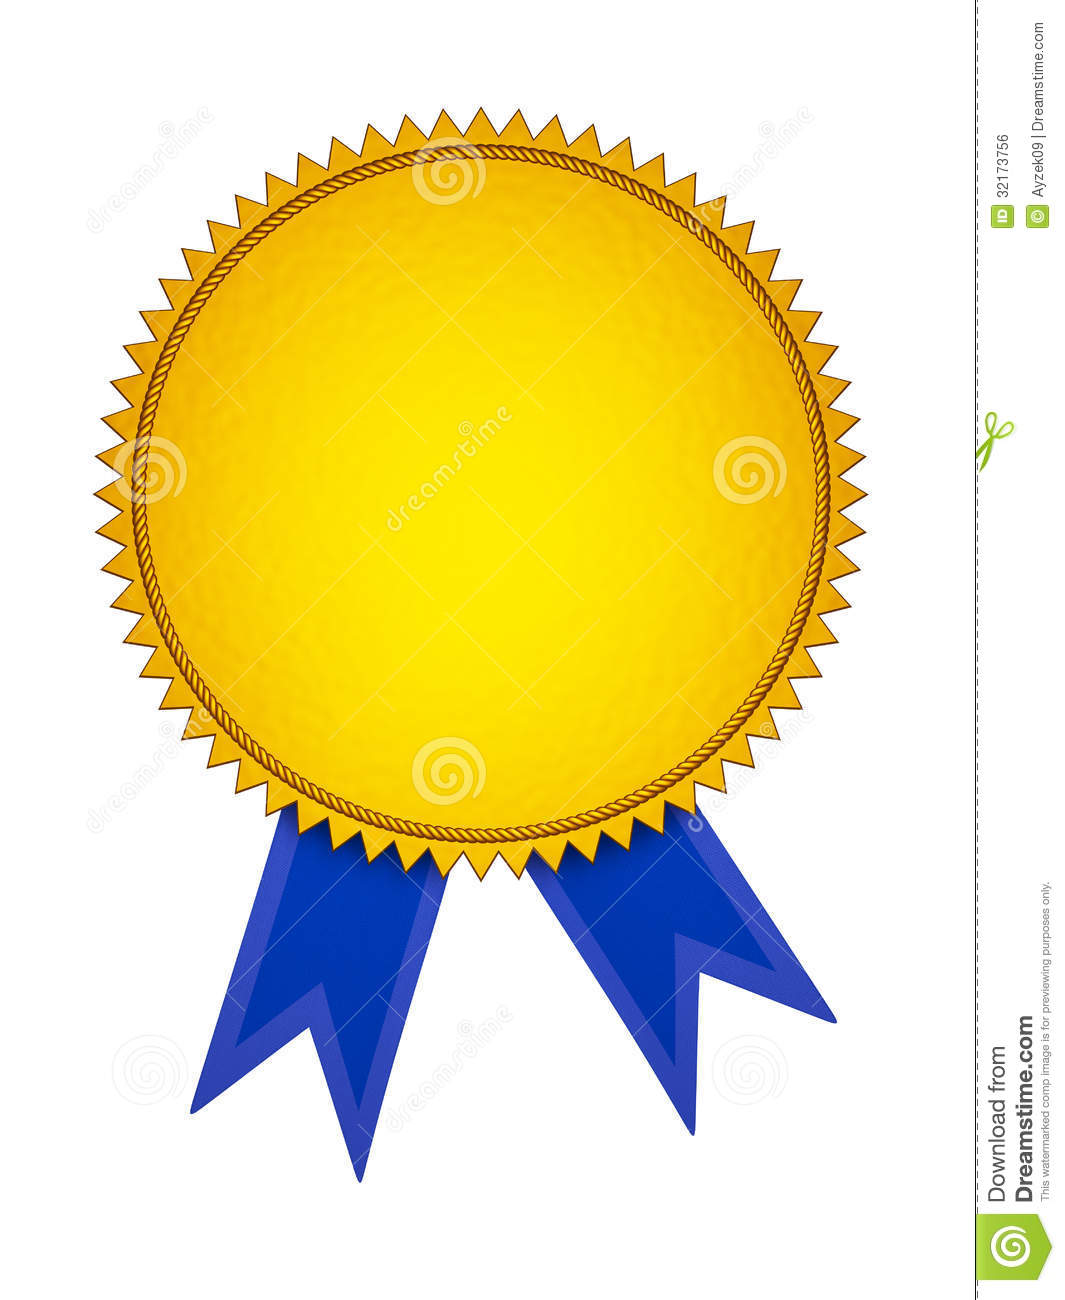 Gold Award Aedal With Blue Ribbon  Isolated On White